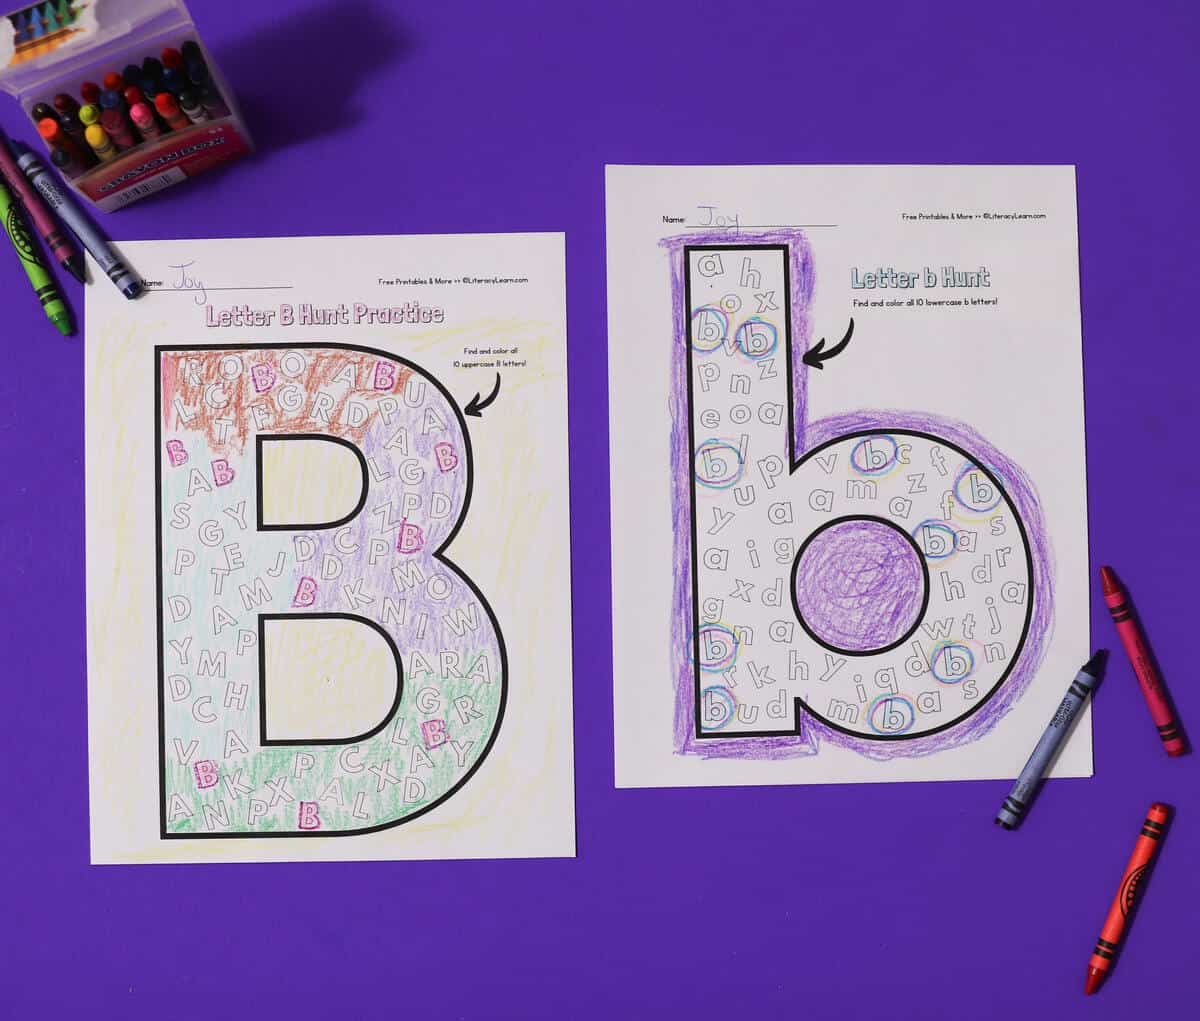 A printed uppercase and lowercase letter B hunt worksheet on a purple background.